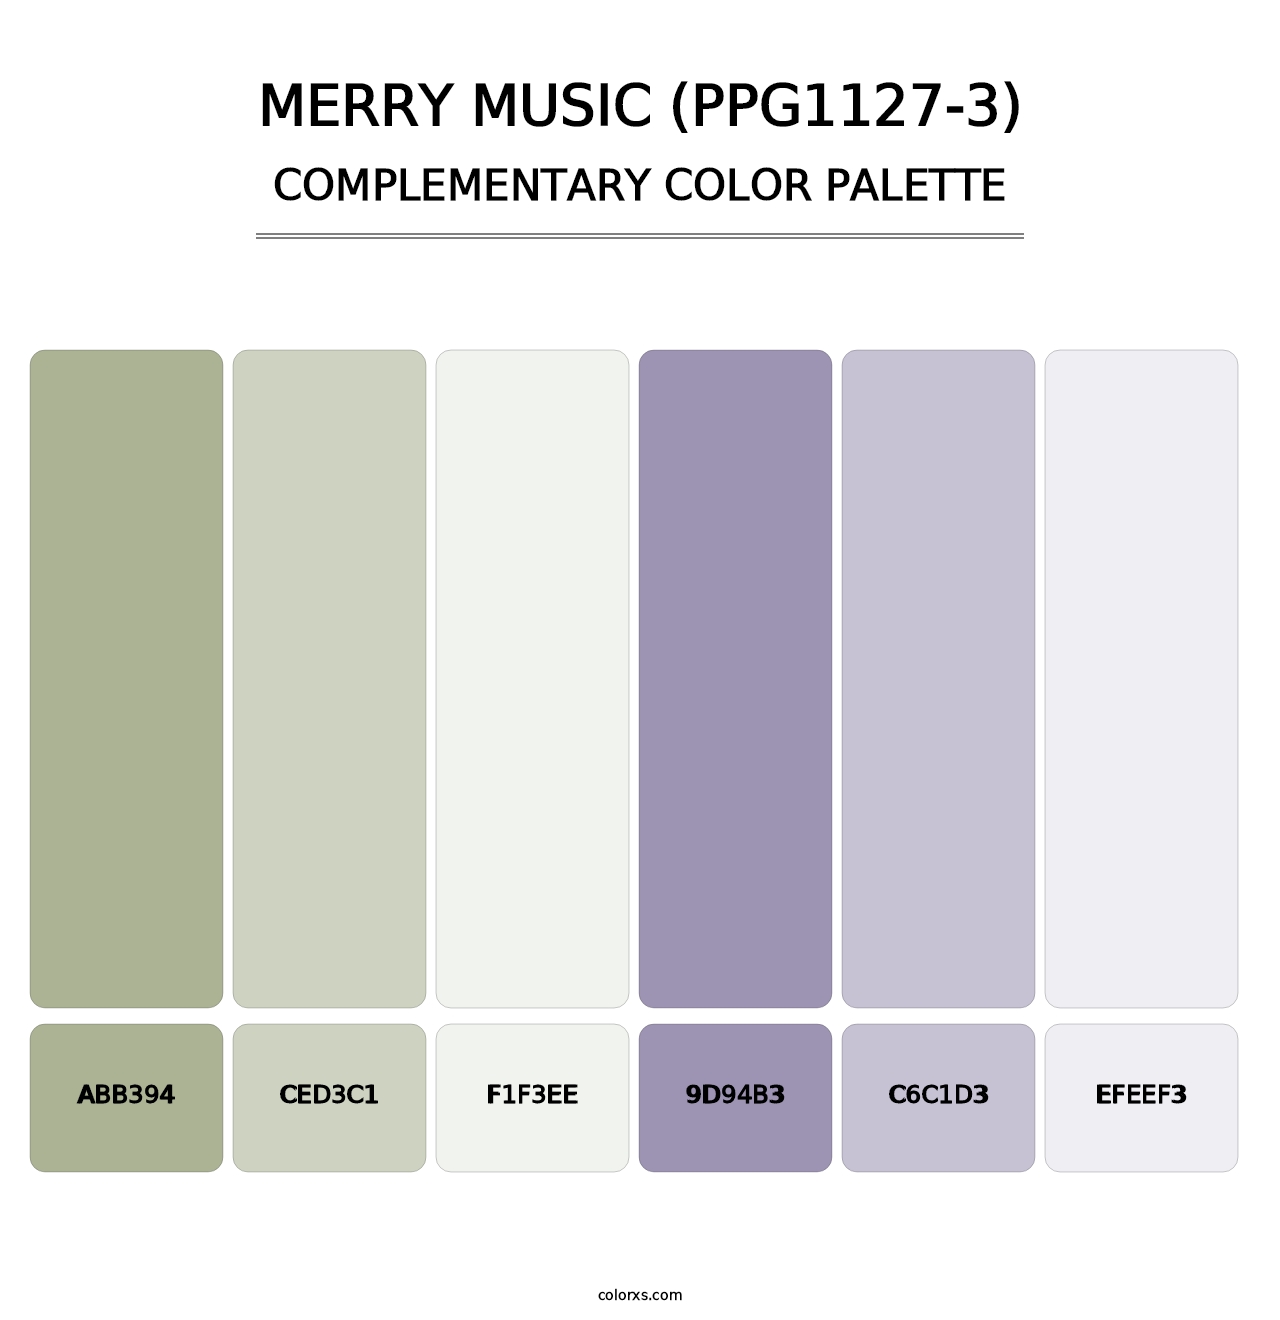 Merry Music (PPG1127-3) - Complementary Color Palette